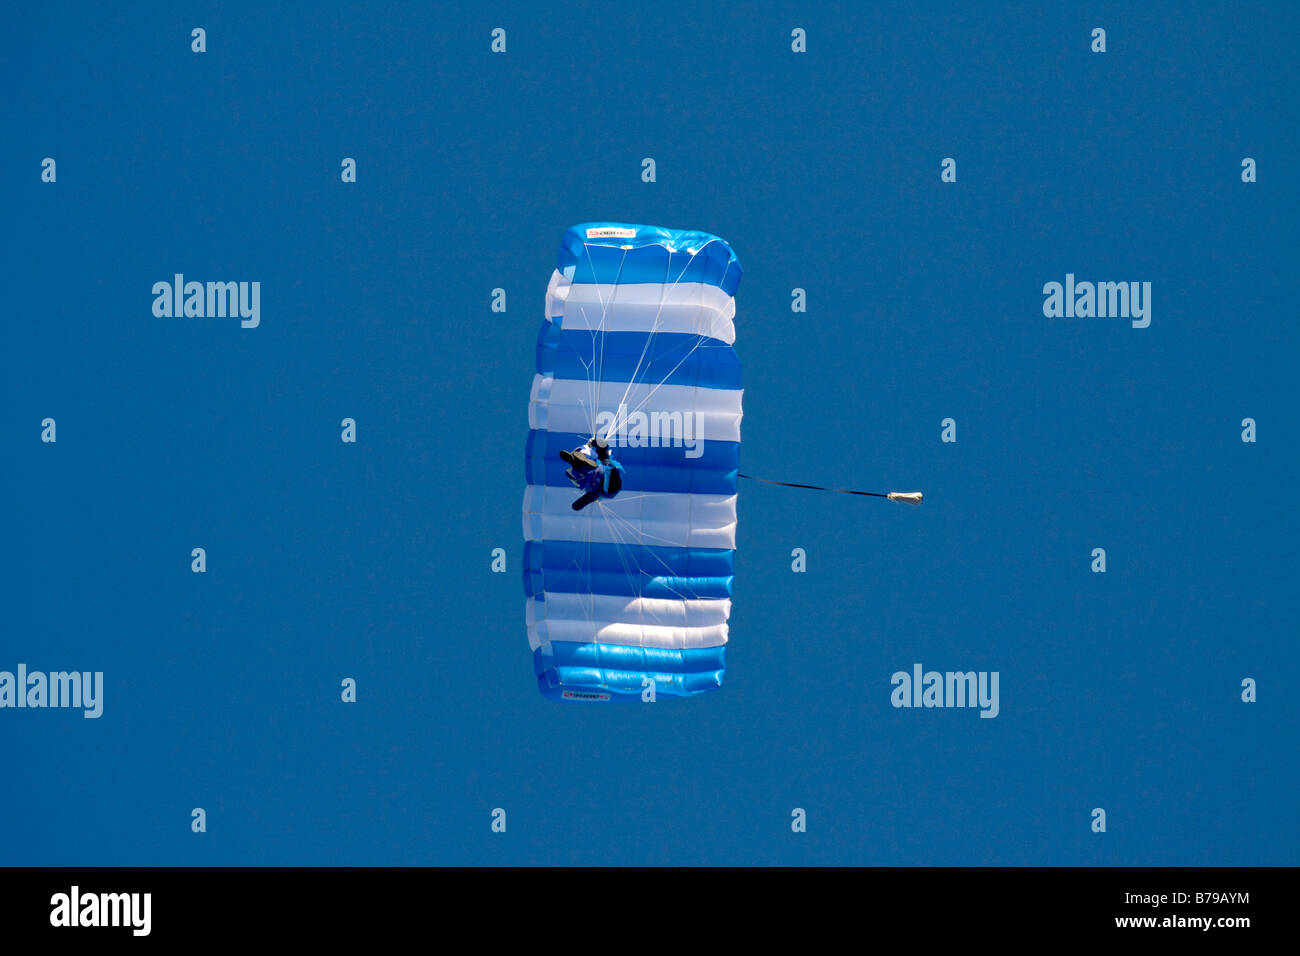 A SKYDIVER HANGS UNDER HIS PARACHUTE AND GLIDES ACROSS THE BLUE SKY Stock Photo